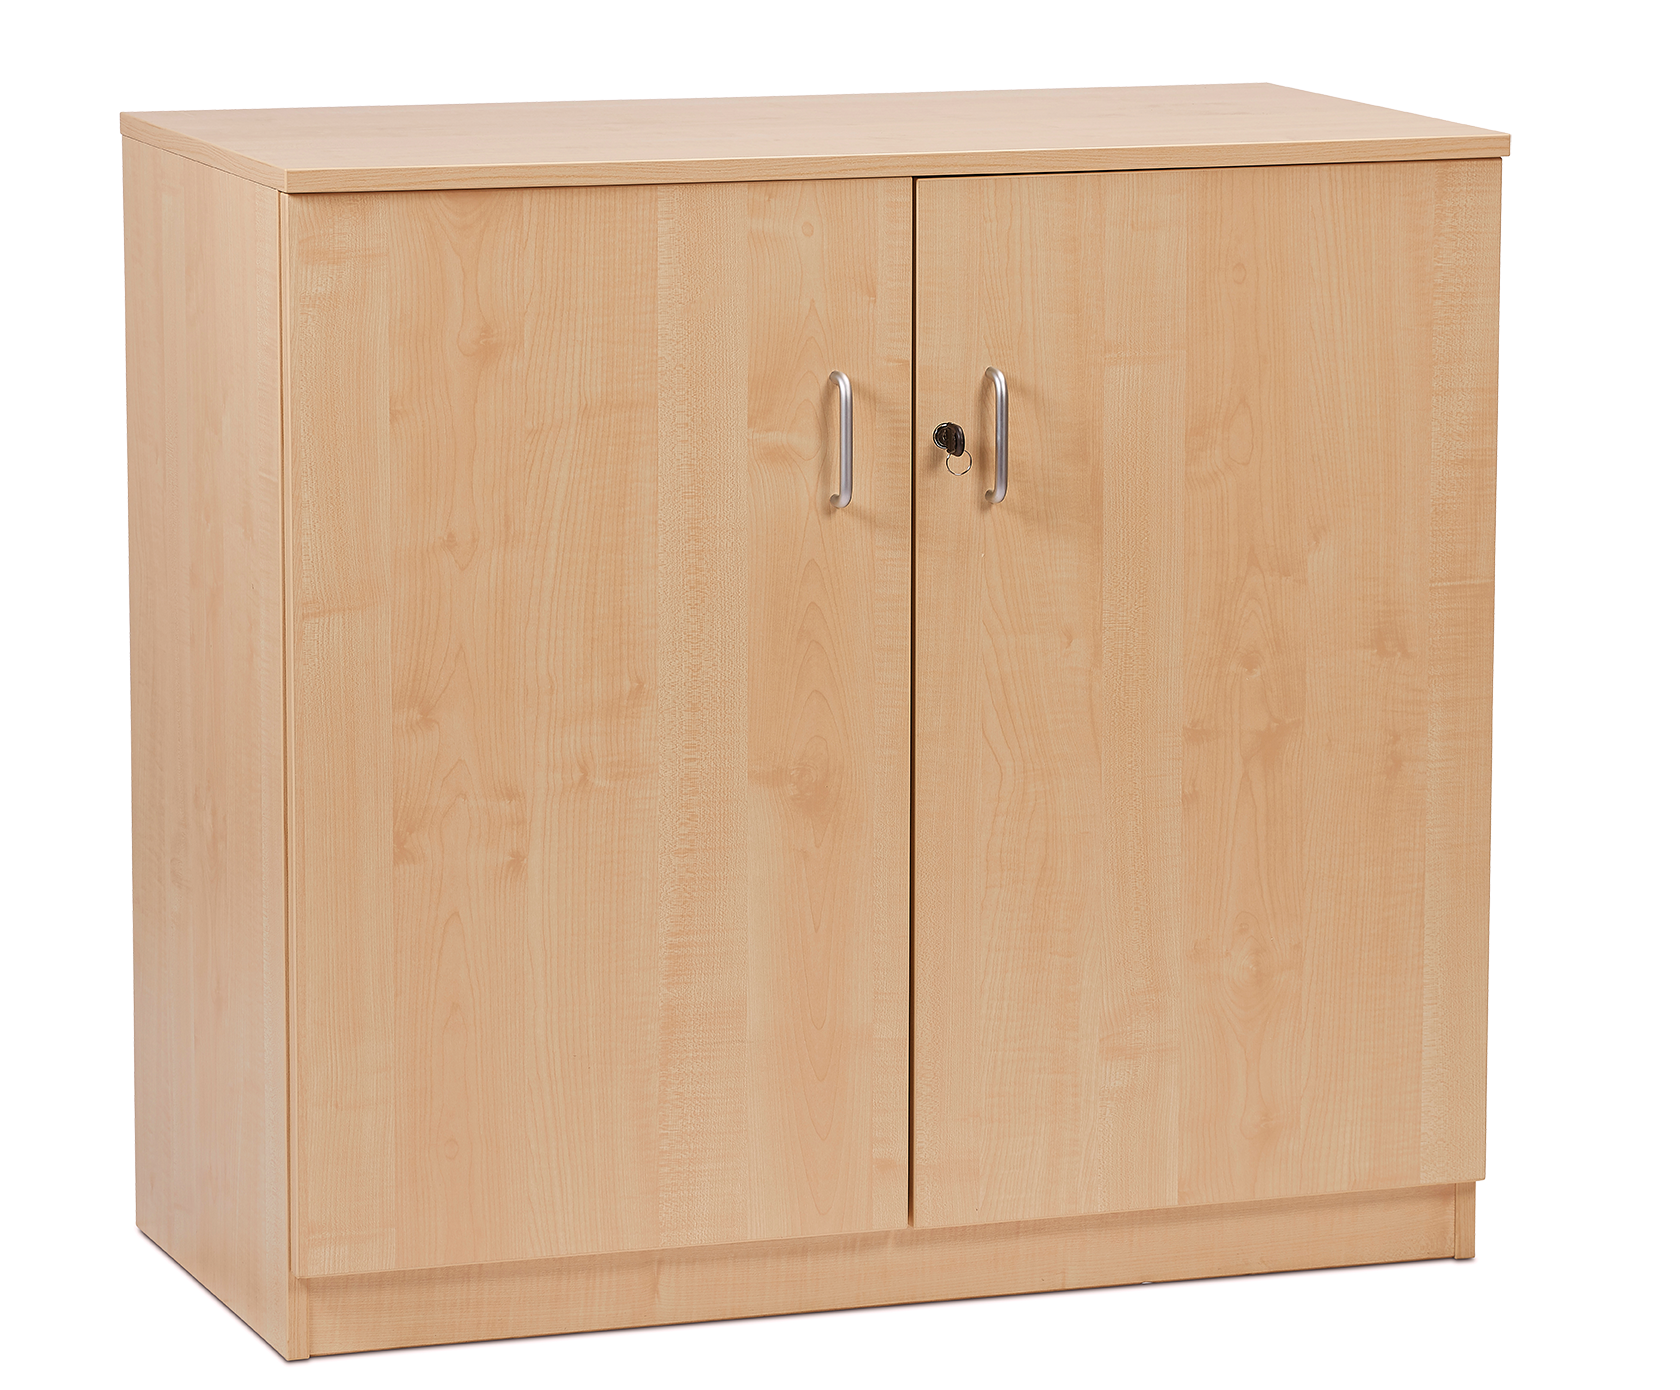 PT888-Millhouse-Early-Years-Furniture-Lockable-Storage-Cupboard_Main_RGB.png